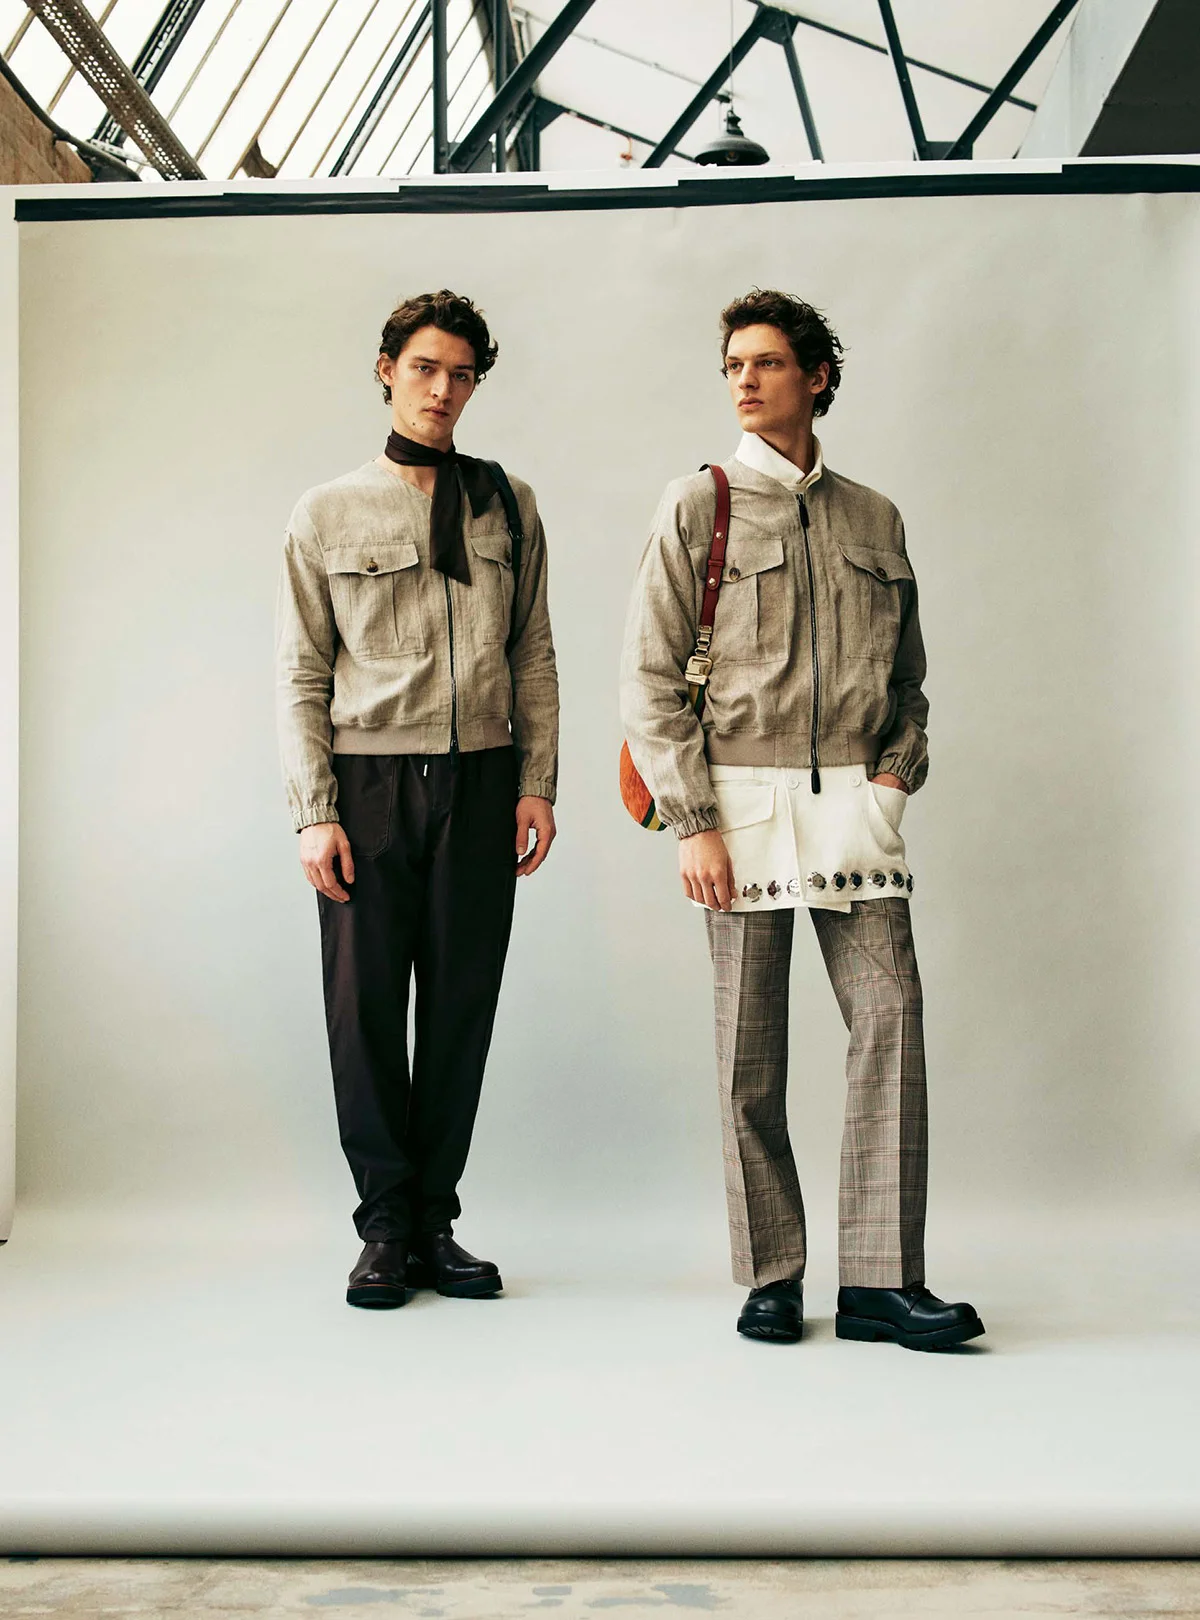 Valentin Caron and Otto Lotz by Edd Horder for The Sunday Times Style March 20th, 2022